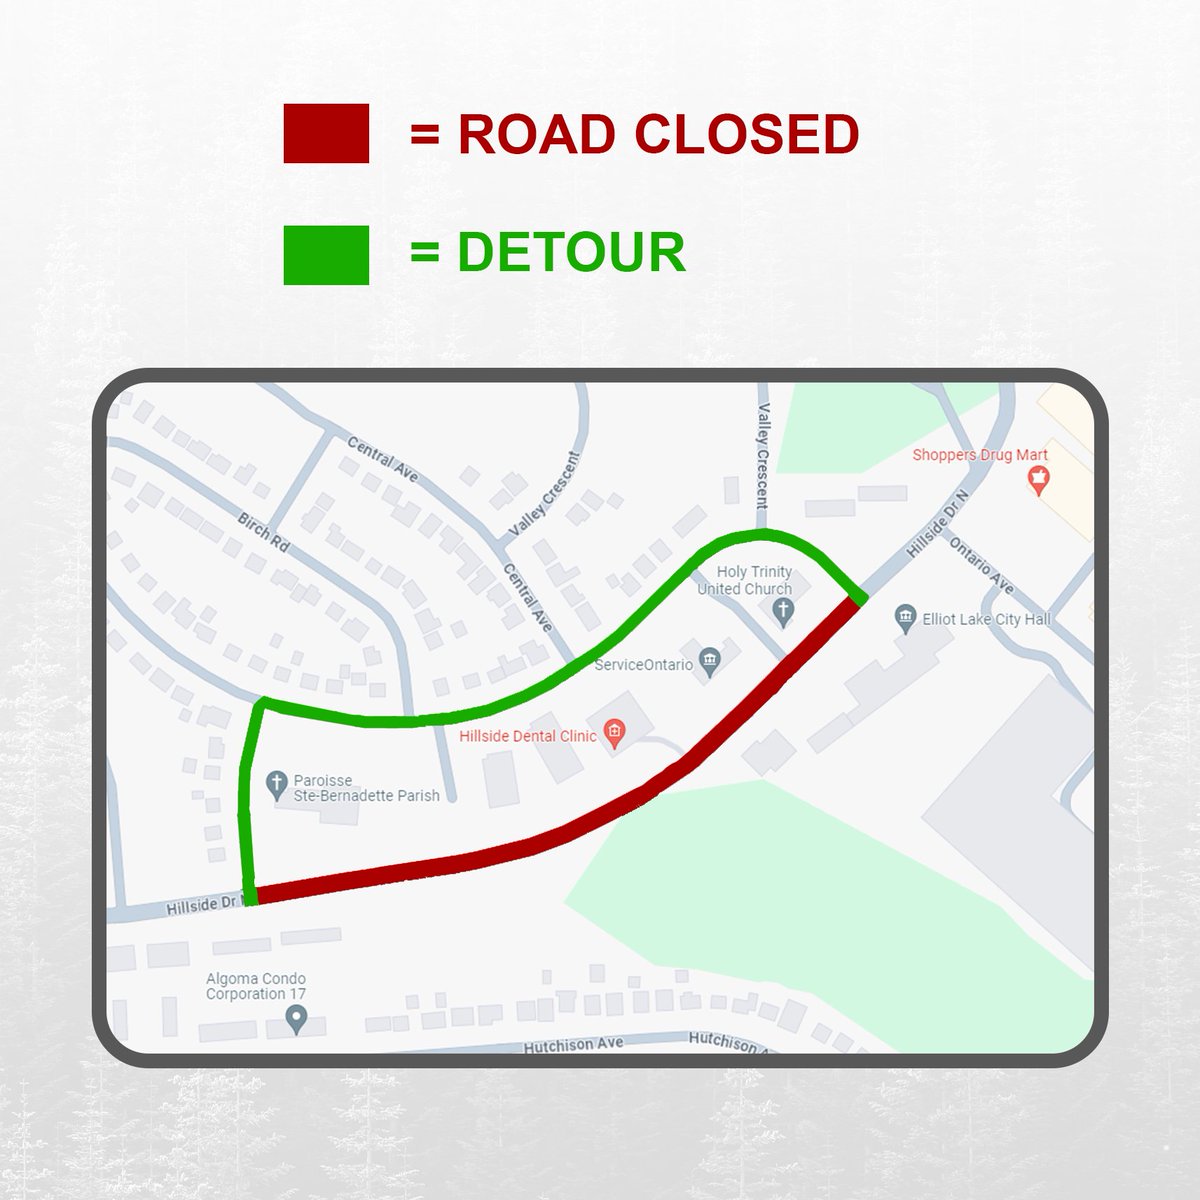 Please Be Aware The closure of Hillside Dr. N. between Spruce Avenue and Beech Road has been extended. That portion of road will now be closed until further notice.